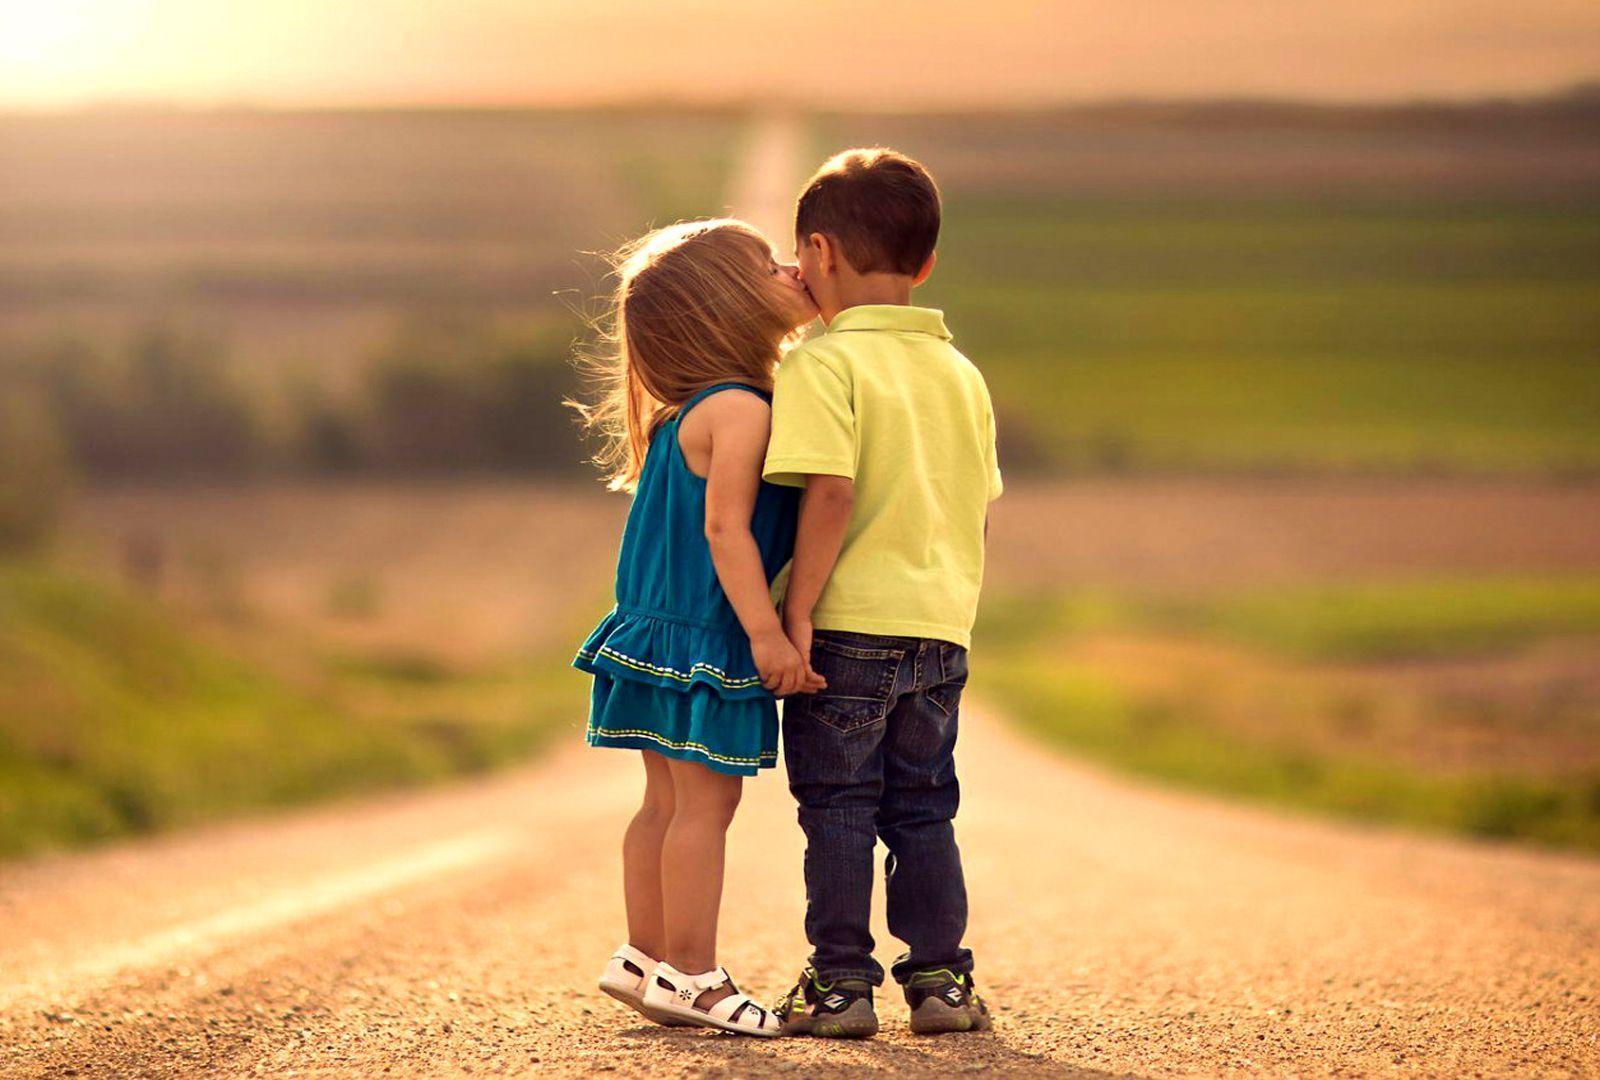 Cute couple wallpaper by nouris_verma - Download on ZEDGE™ | 91a4